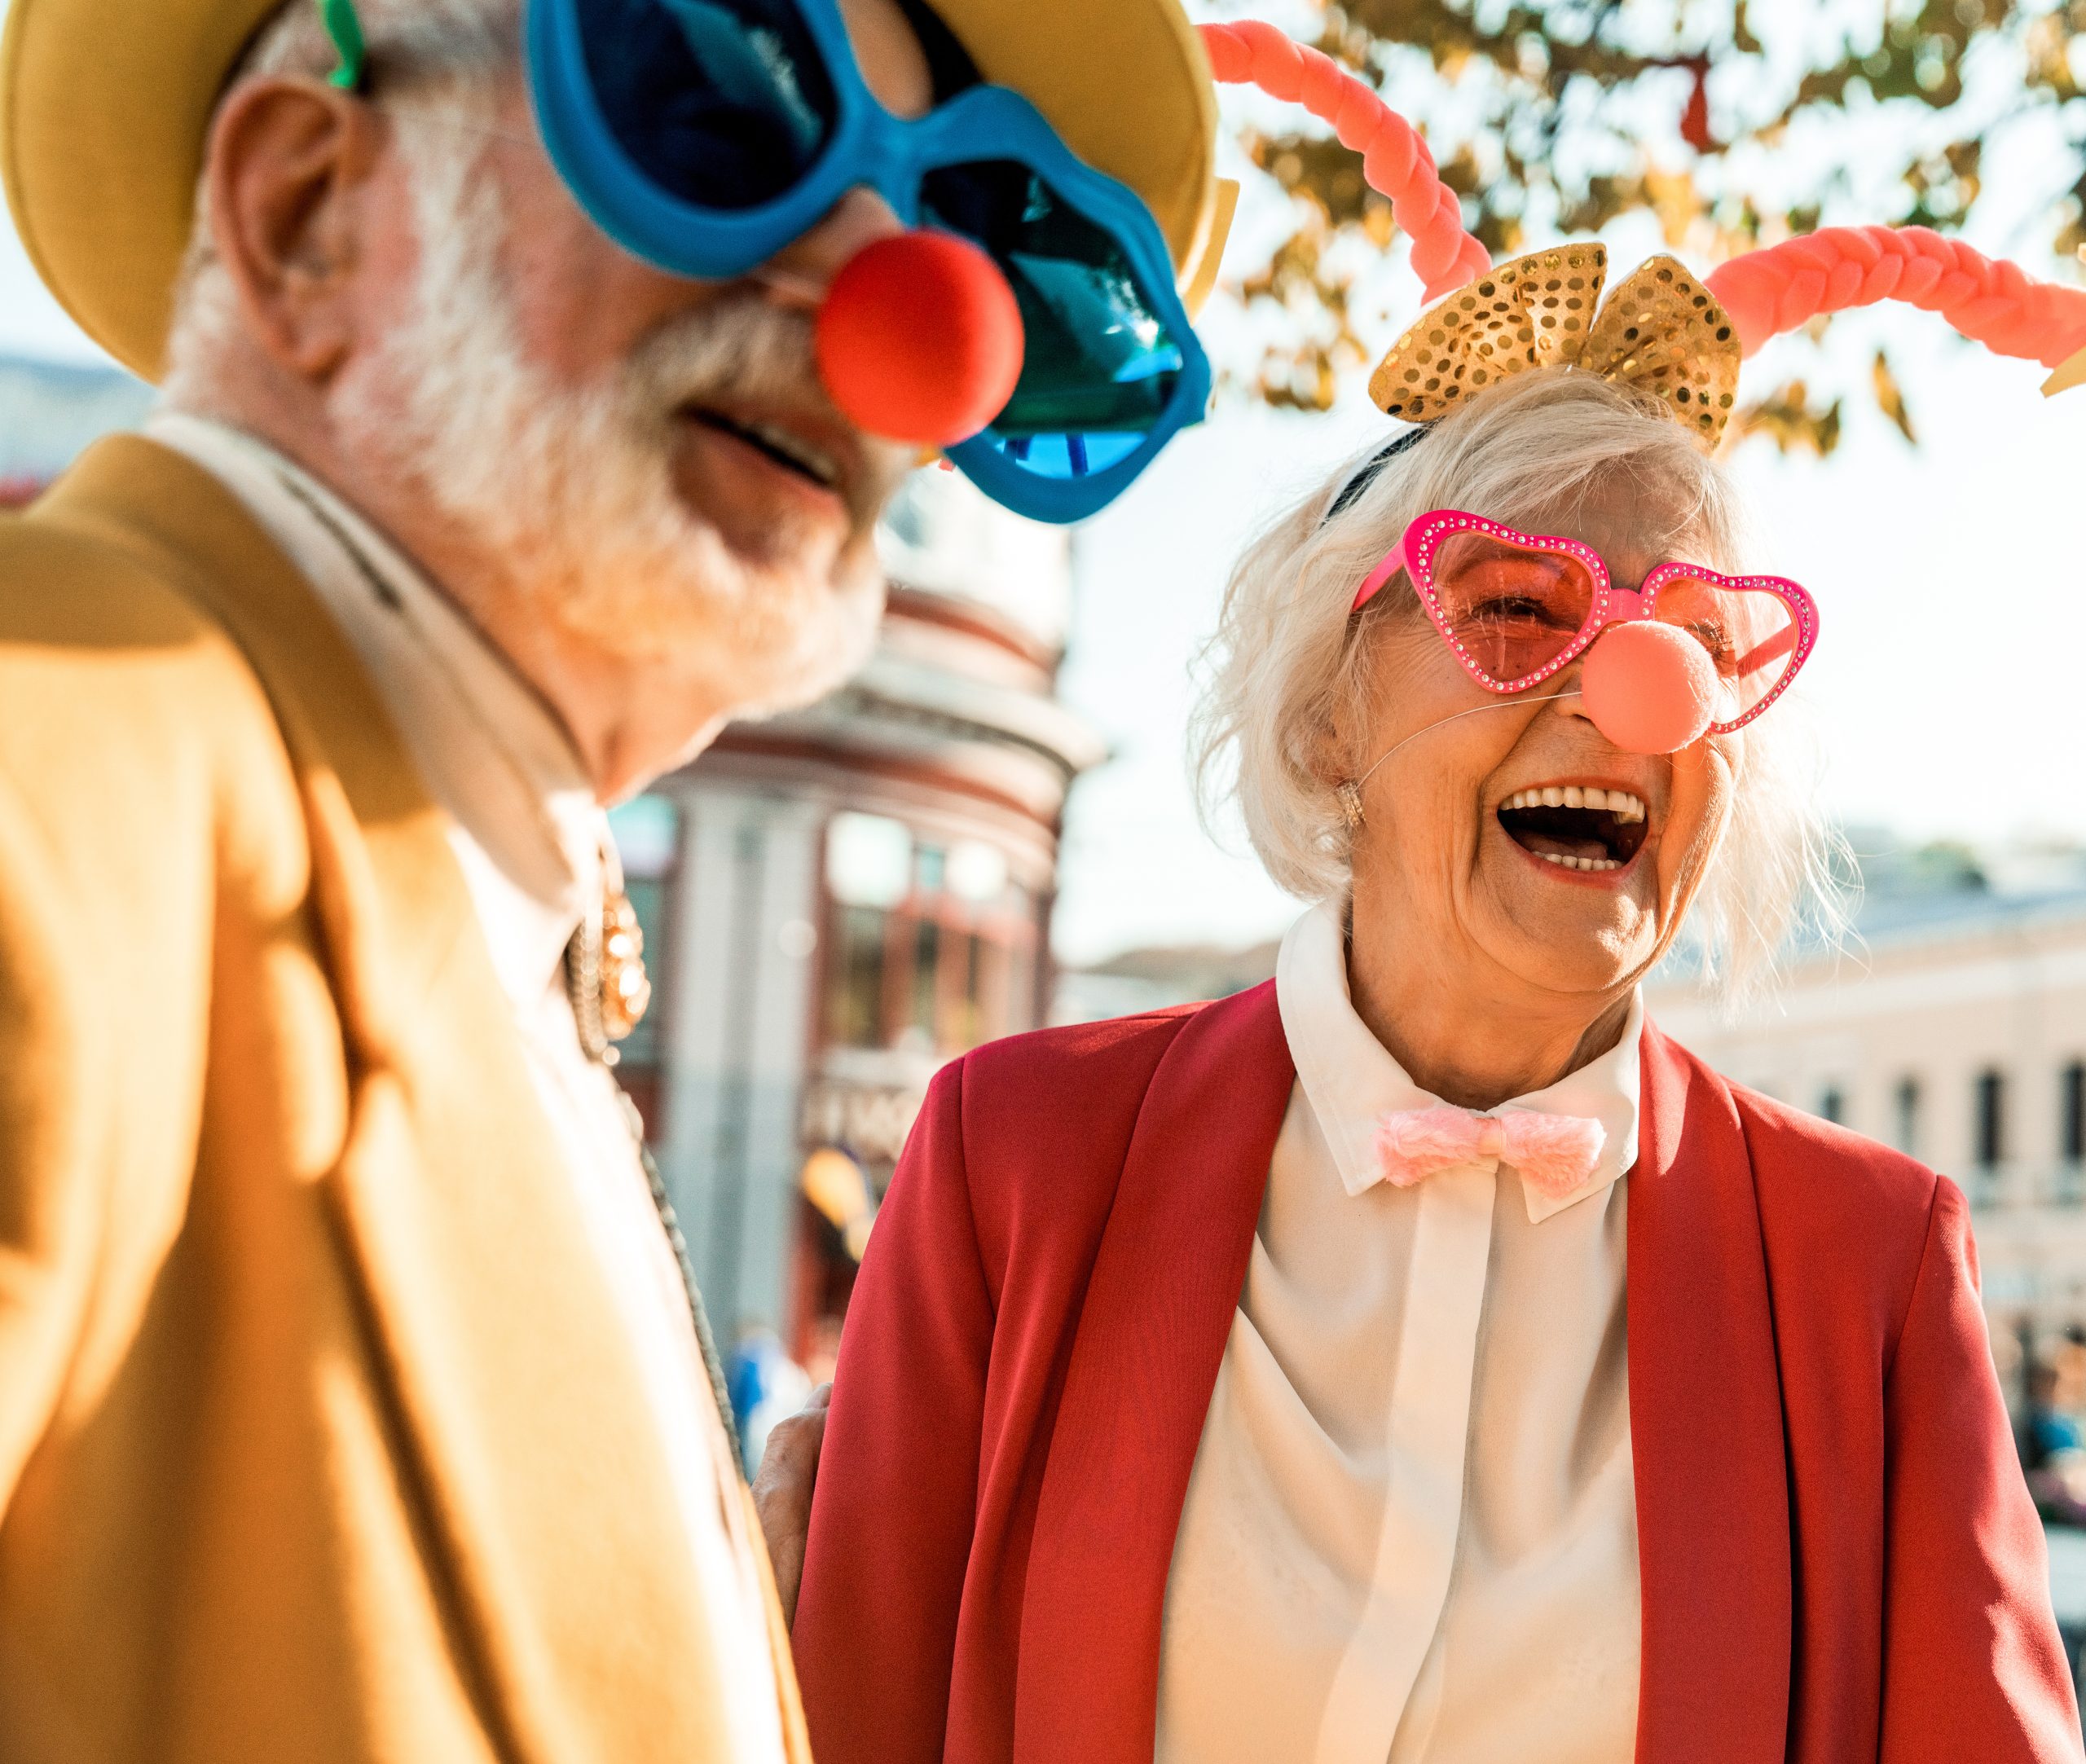 An elderly couple is wearing oversized sunglasses and clown noses